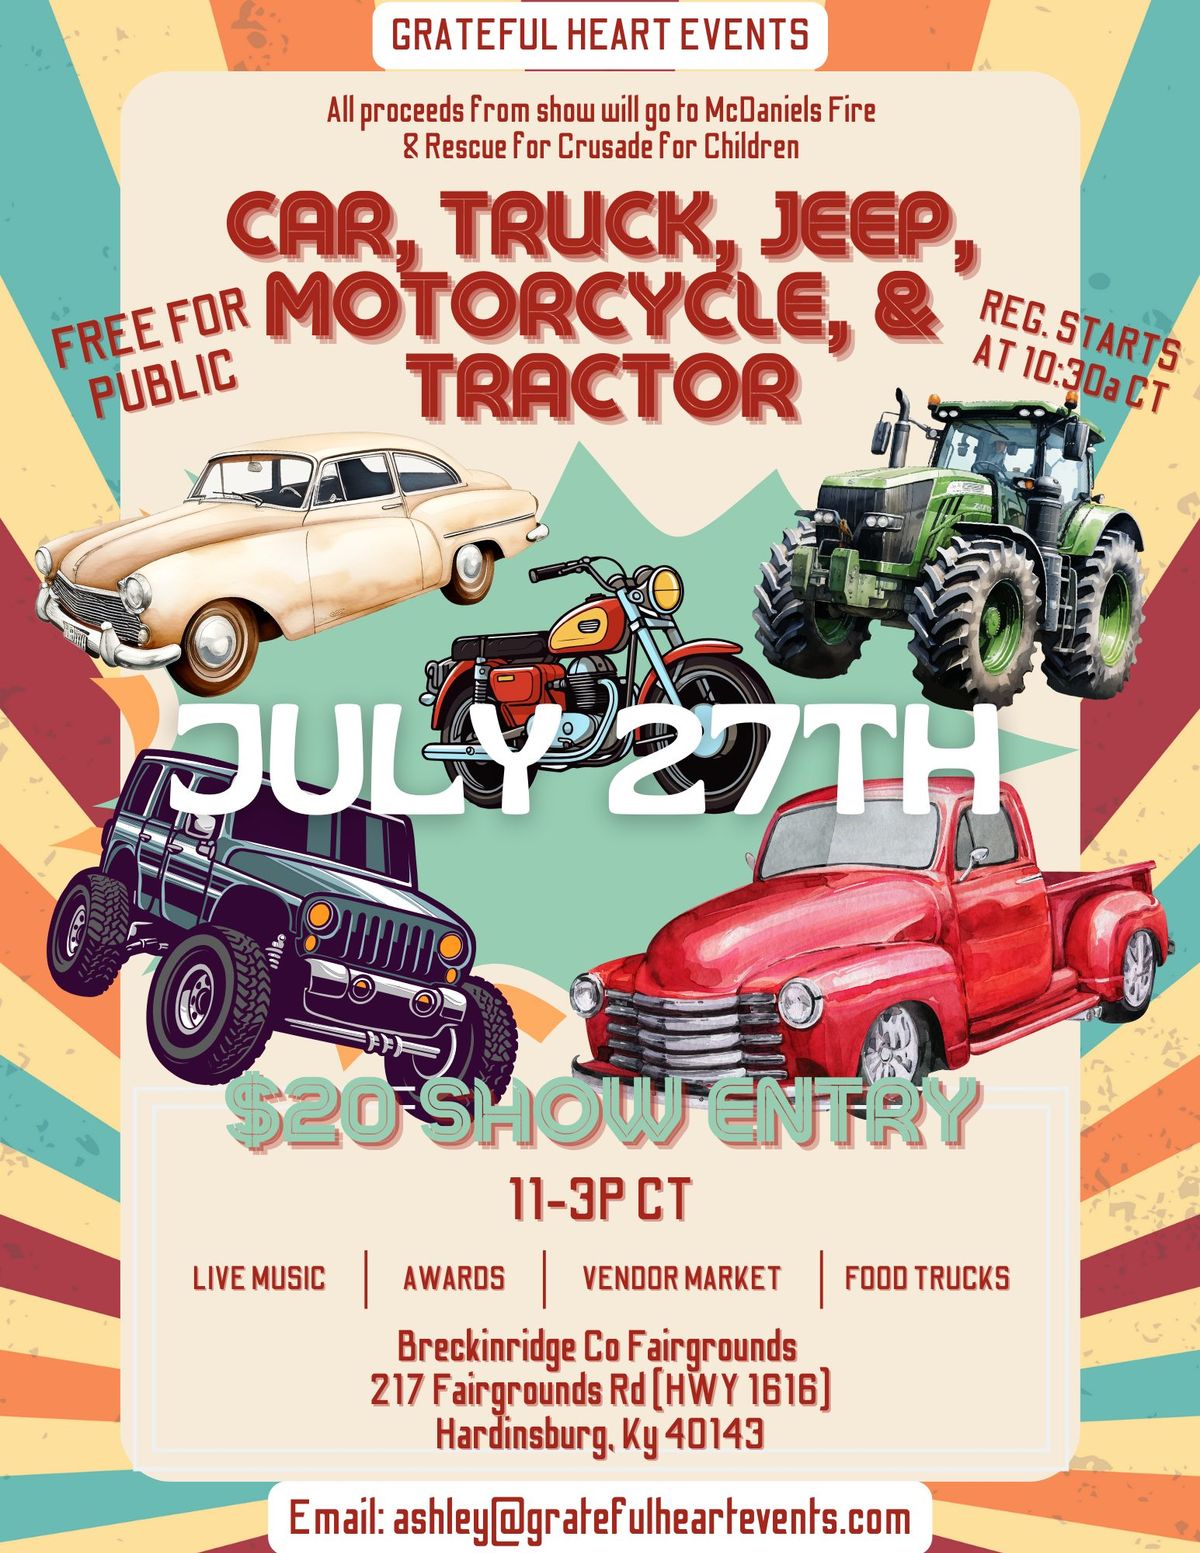 Grateful Heart Events\/McDaniels Fire & Rescue - Car, Truck, Jeep, Motorcycle & Tractor Show